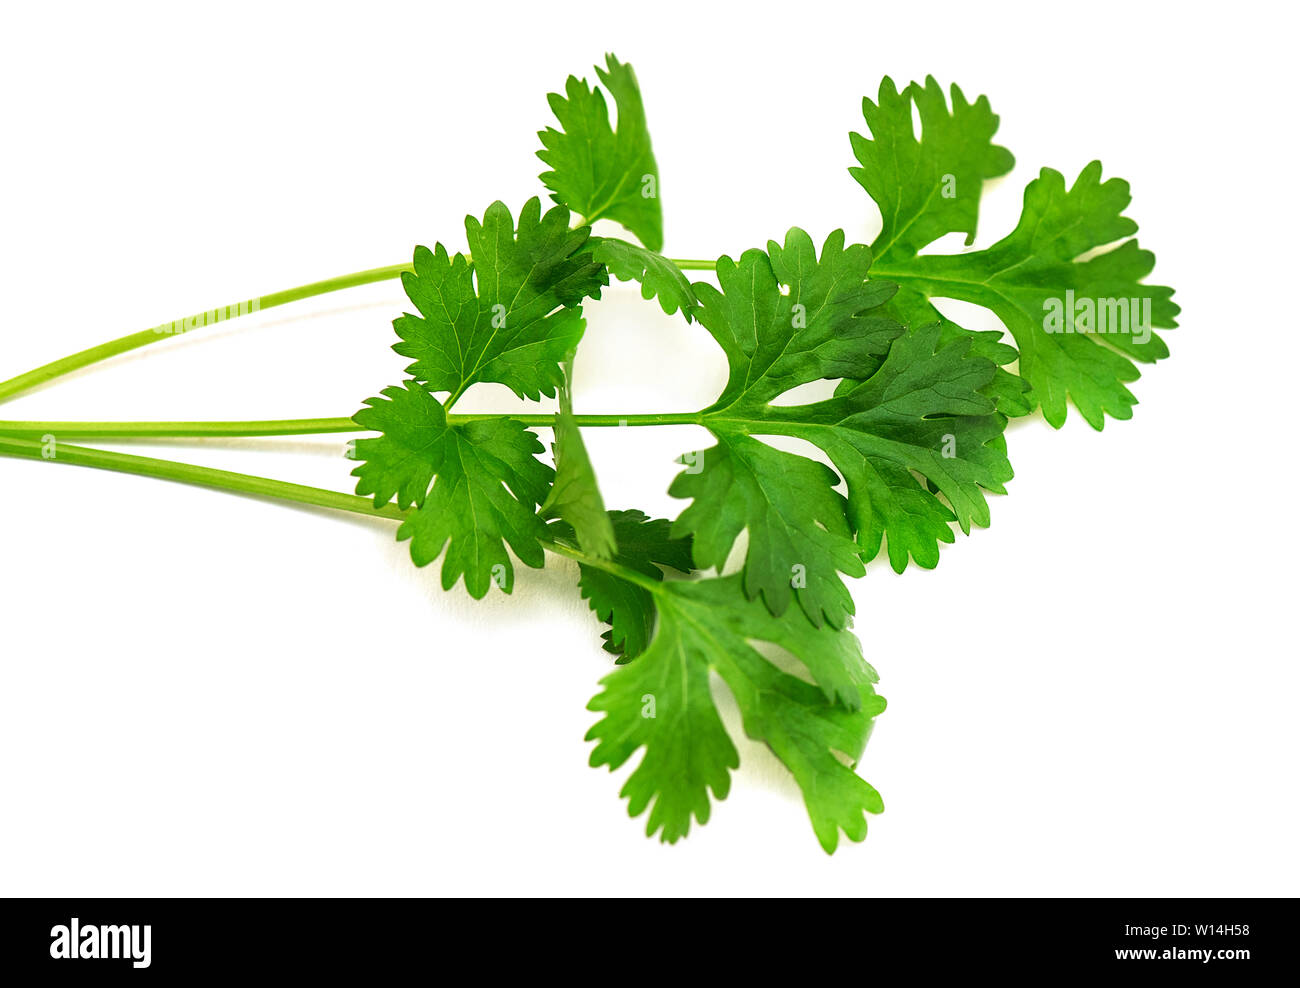 Close-up green branch of Cilantro or Coriander isolated on white Background Stock Photo